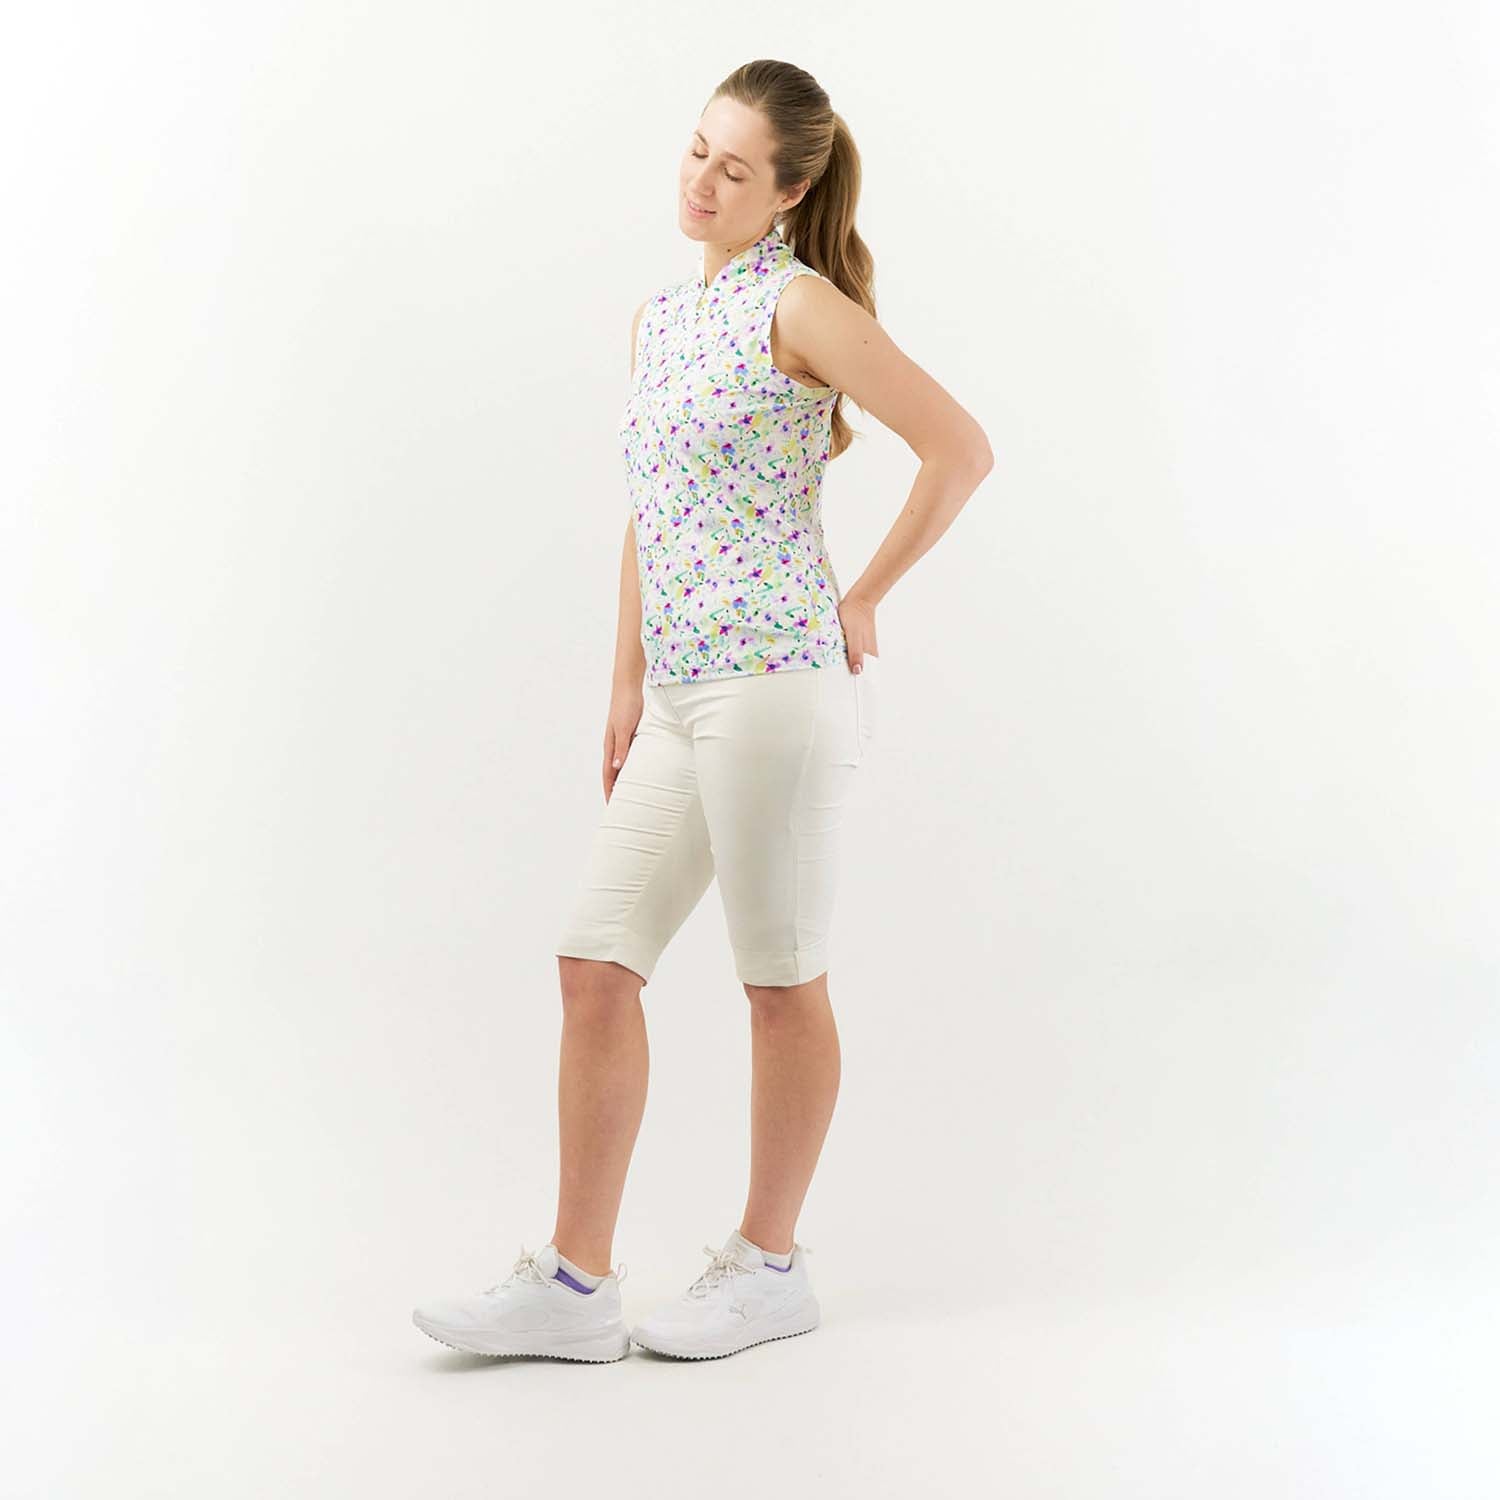 Pure Ladies Sleeveless Zip Neck Golf Top in Ethereal Bouquet Print